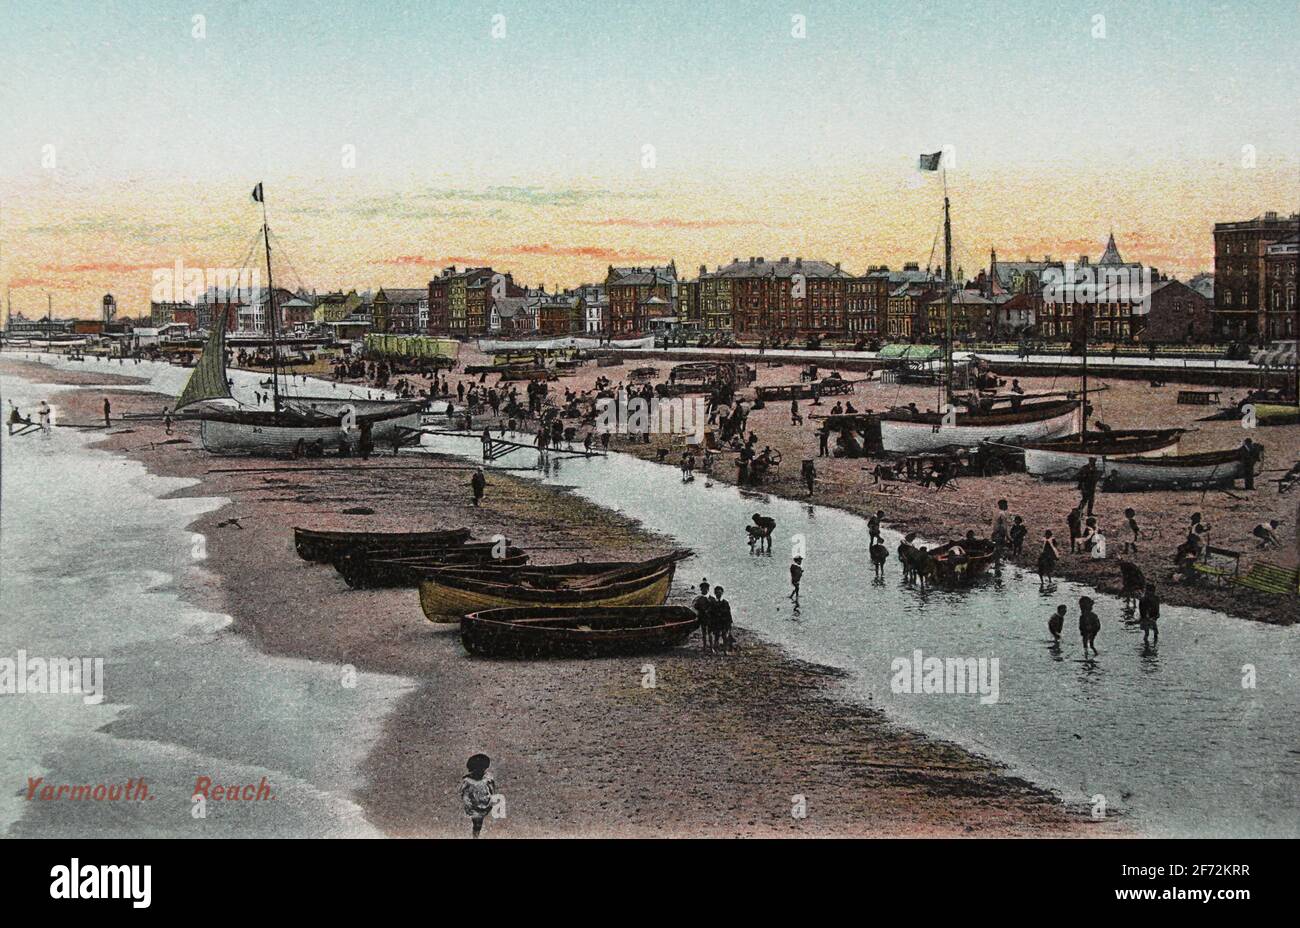 Hand-coloured postcard postmarked 1904 titled 'Yarmouth. The Beach'. Stock Photo